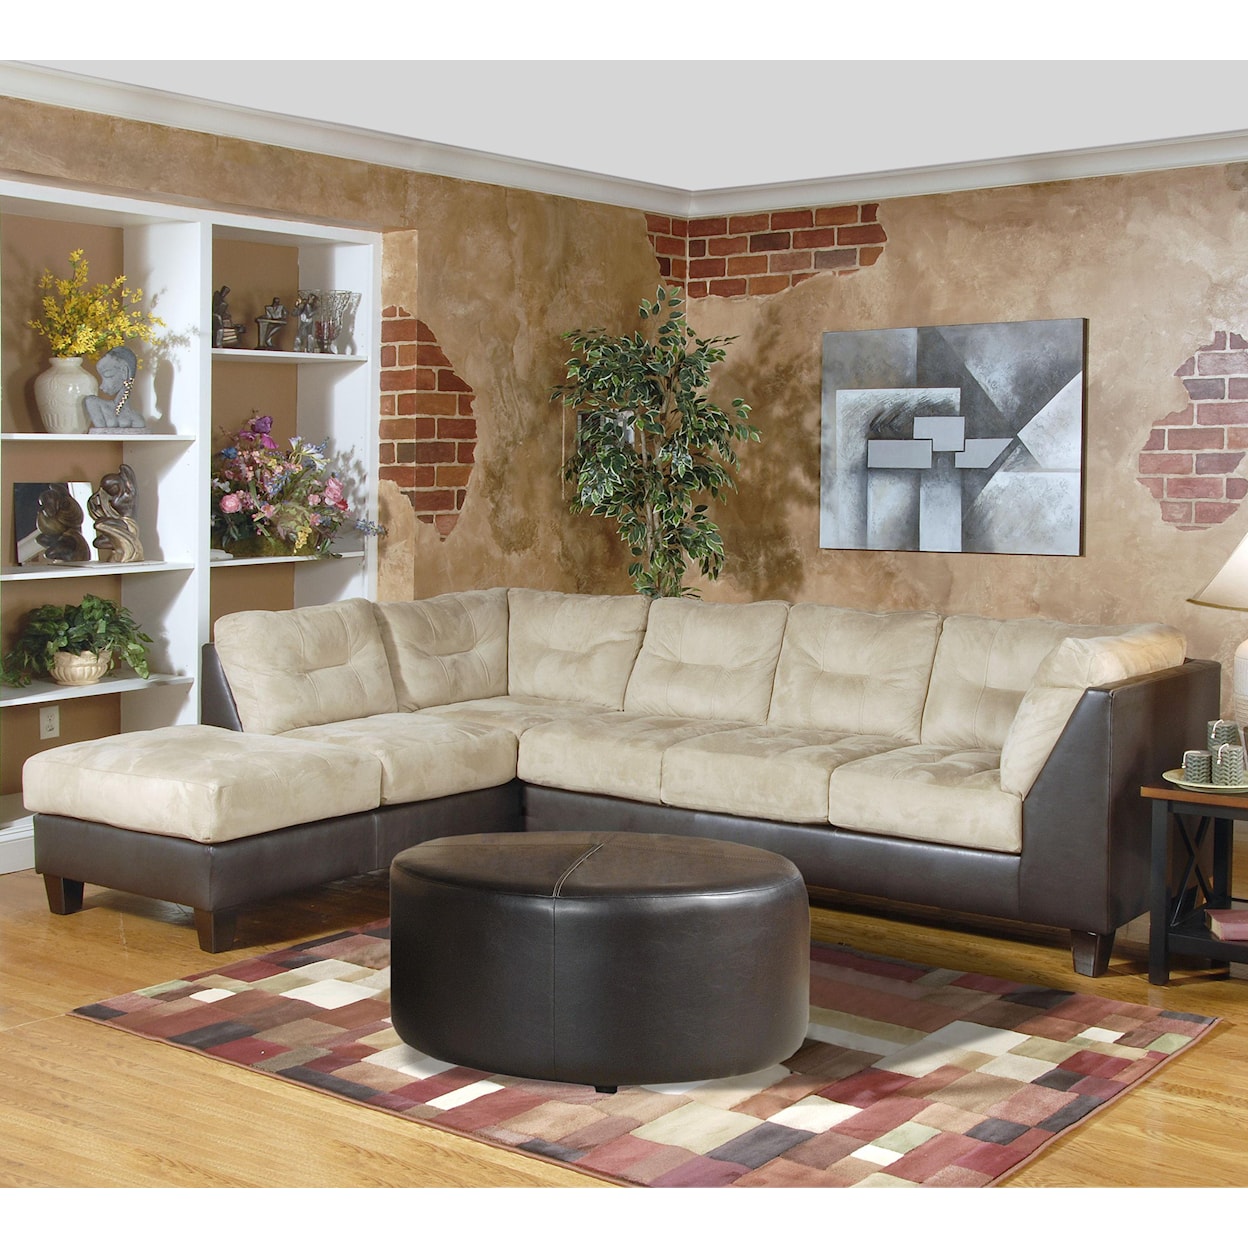 Serta Upholstery by Hughes Furniture 2550 Sectional Sofa